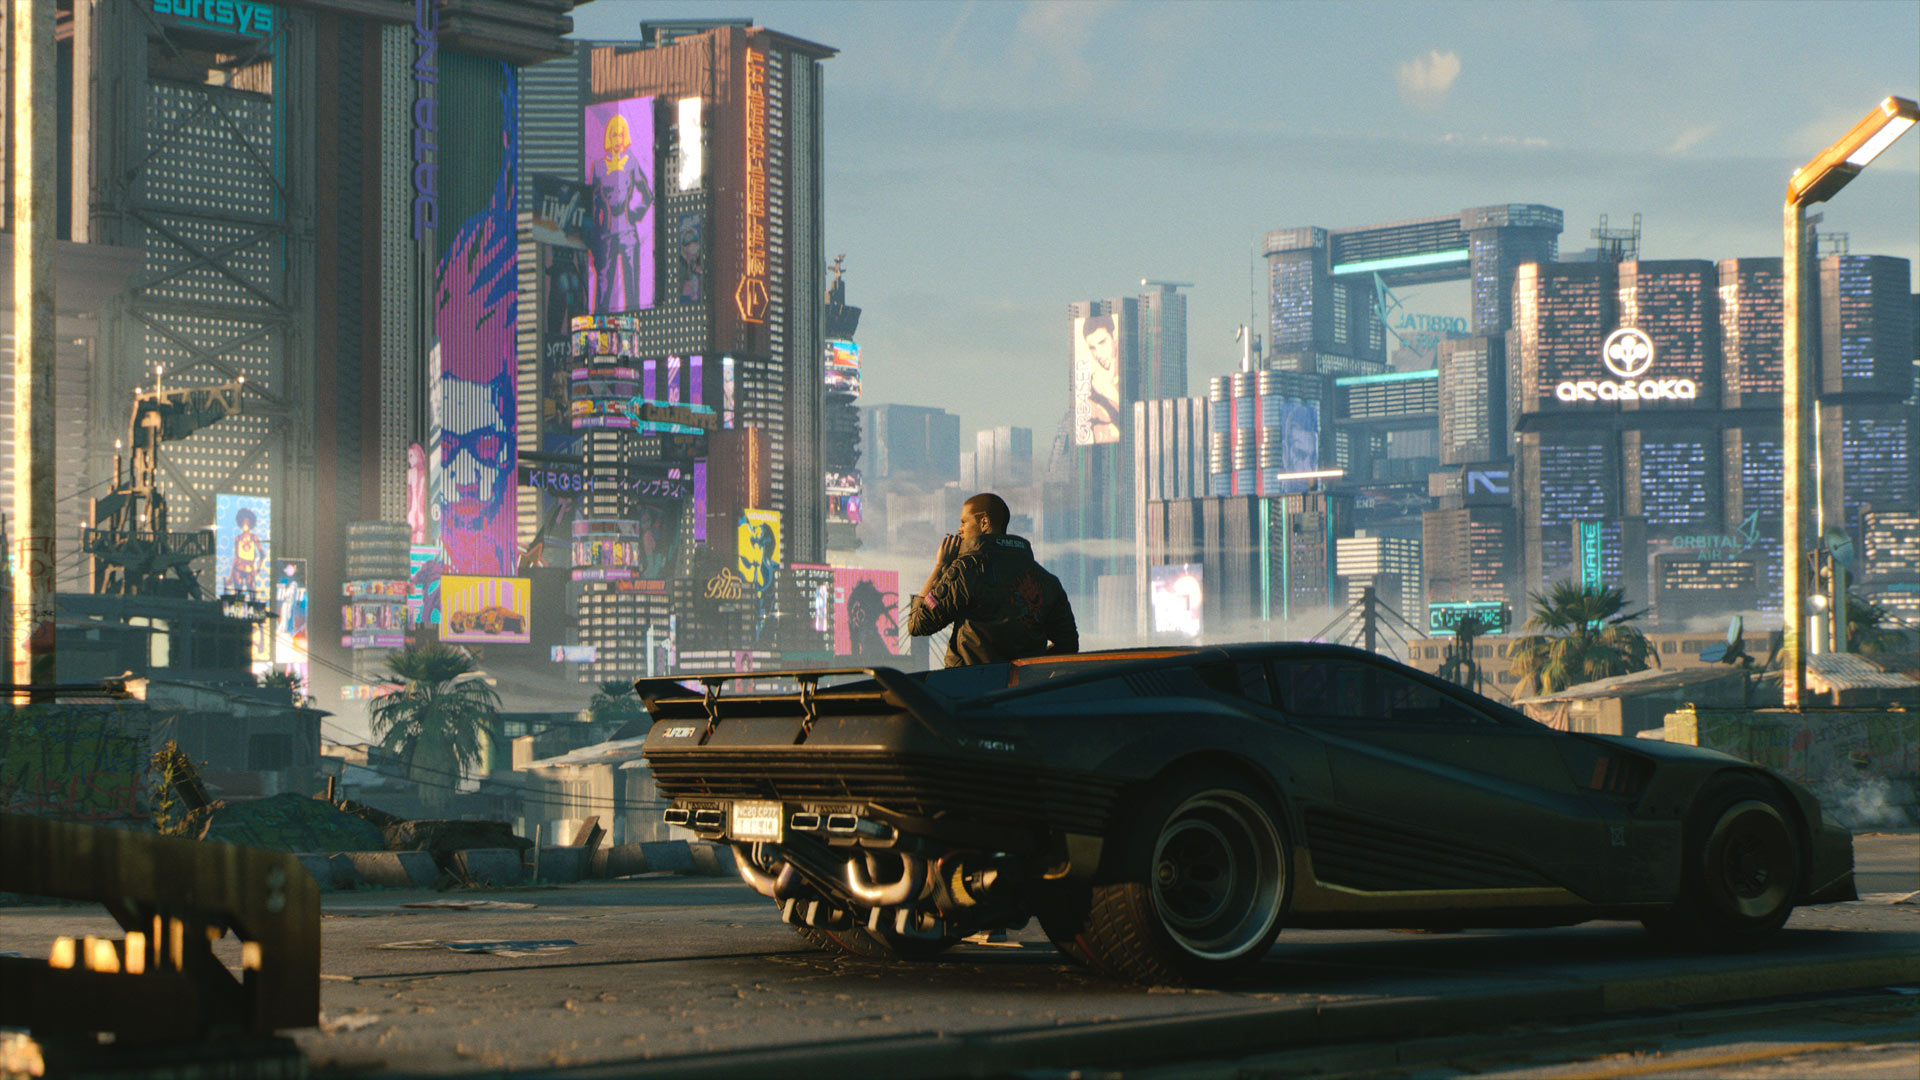 Gritty New ‘Cyberpunk 2077’ Trailer Shown Off During Microsoft’s E3 Briefing